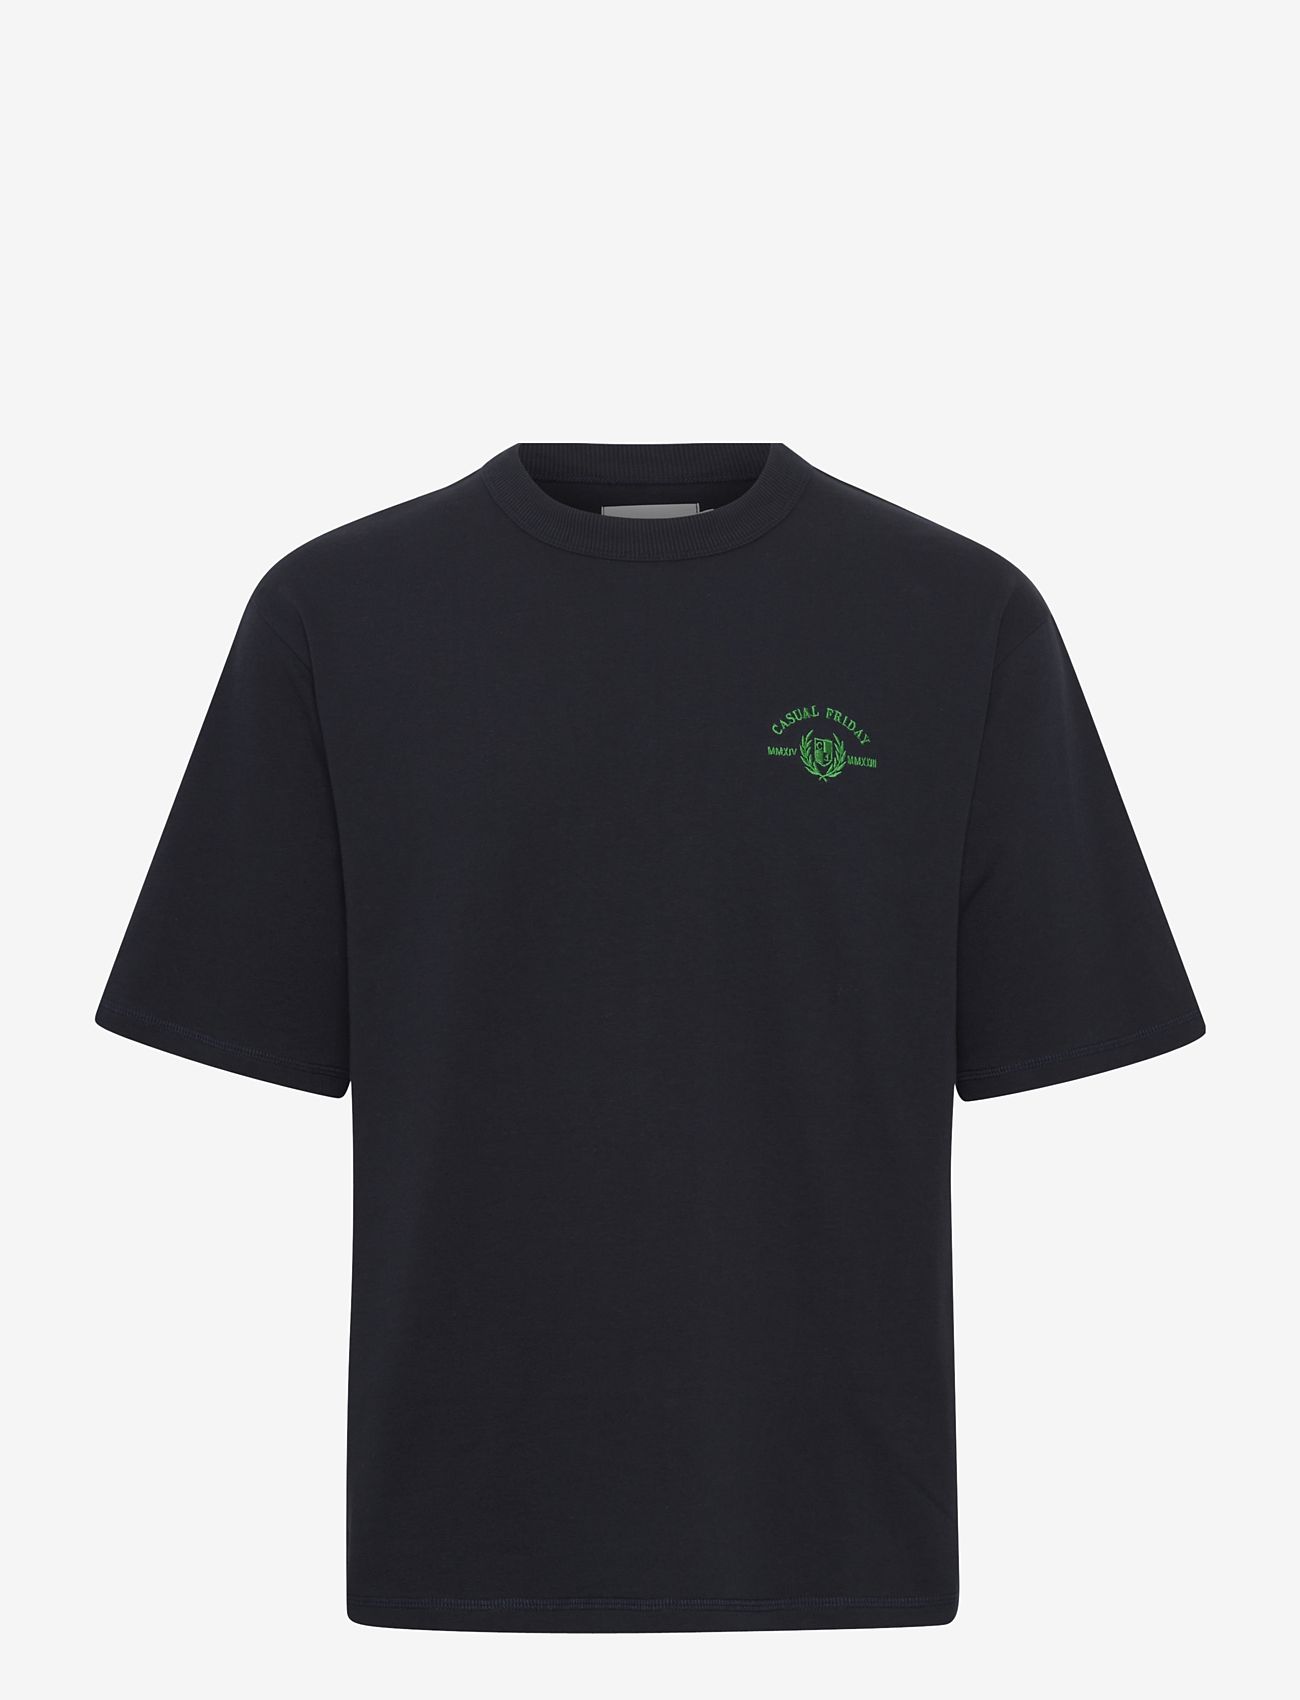 Casual Friday - CFTue tee with chest embroidery - laagste prijzen - dark navy - 0